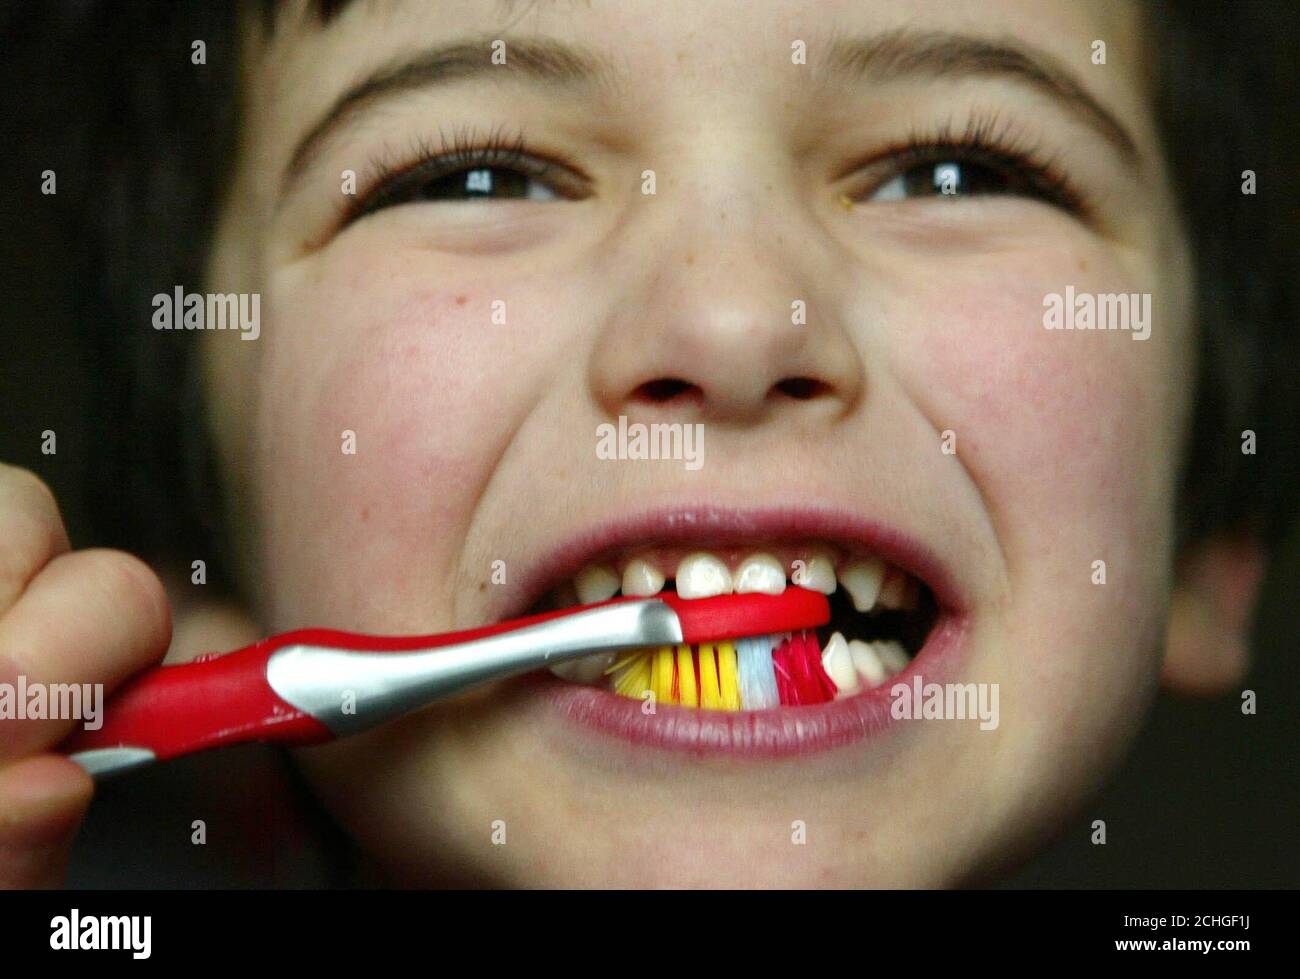 Undated posed photo of a young child brushing his teeth. As it is far more difficult to take a trip to the dentist or hygienist during lockdown, looking after your teeth is even more important than ever. Stock Photo